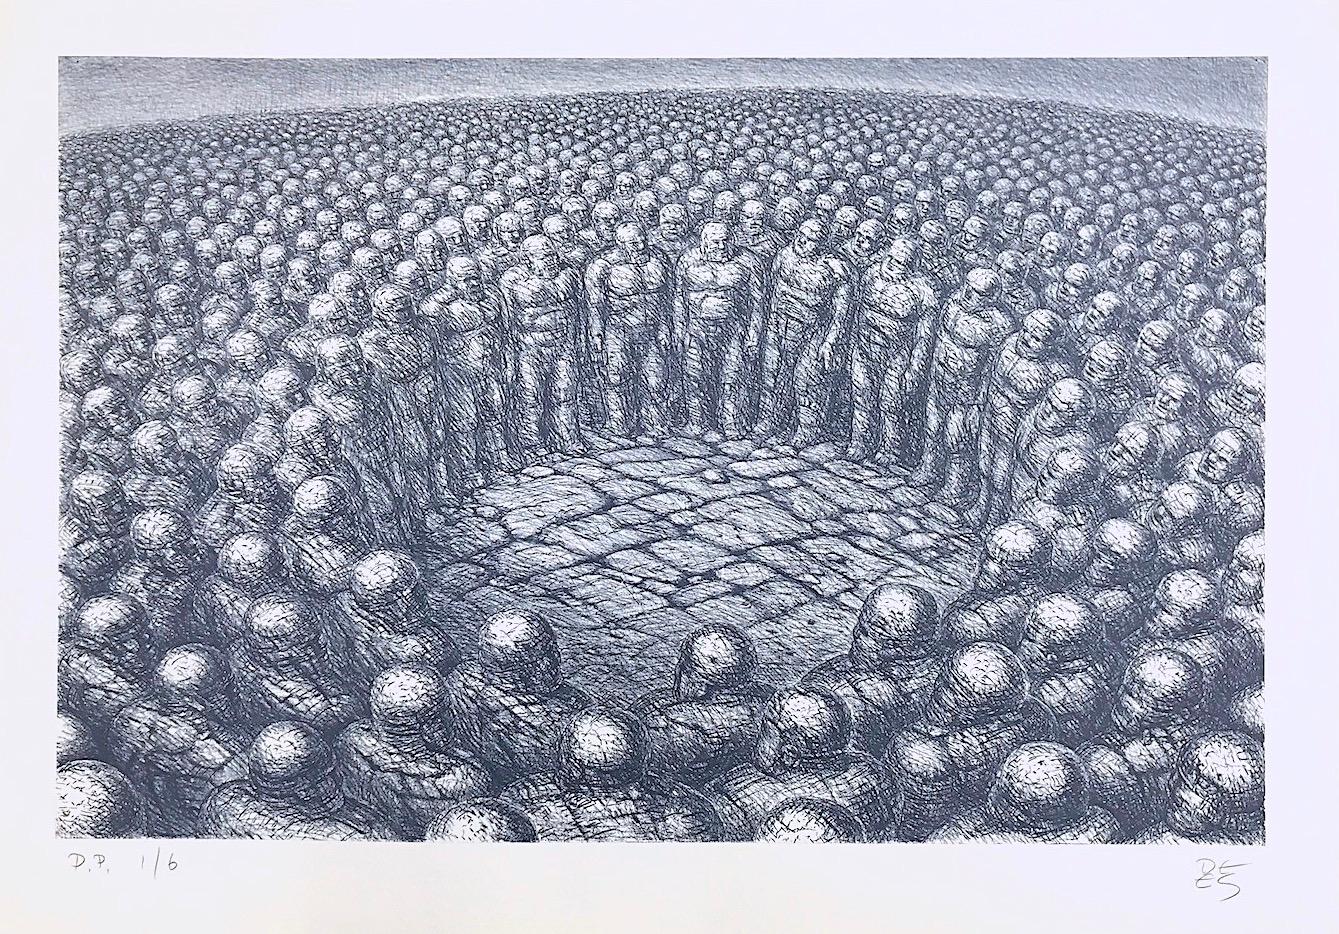 De Es Schwertberger Figurative Print - CENTER OF ATTENTION Signed Lithograph, Surreal Figurative Drawing, Crowd Circle